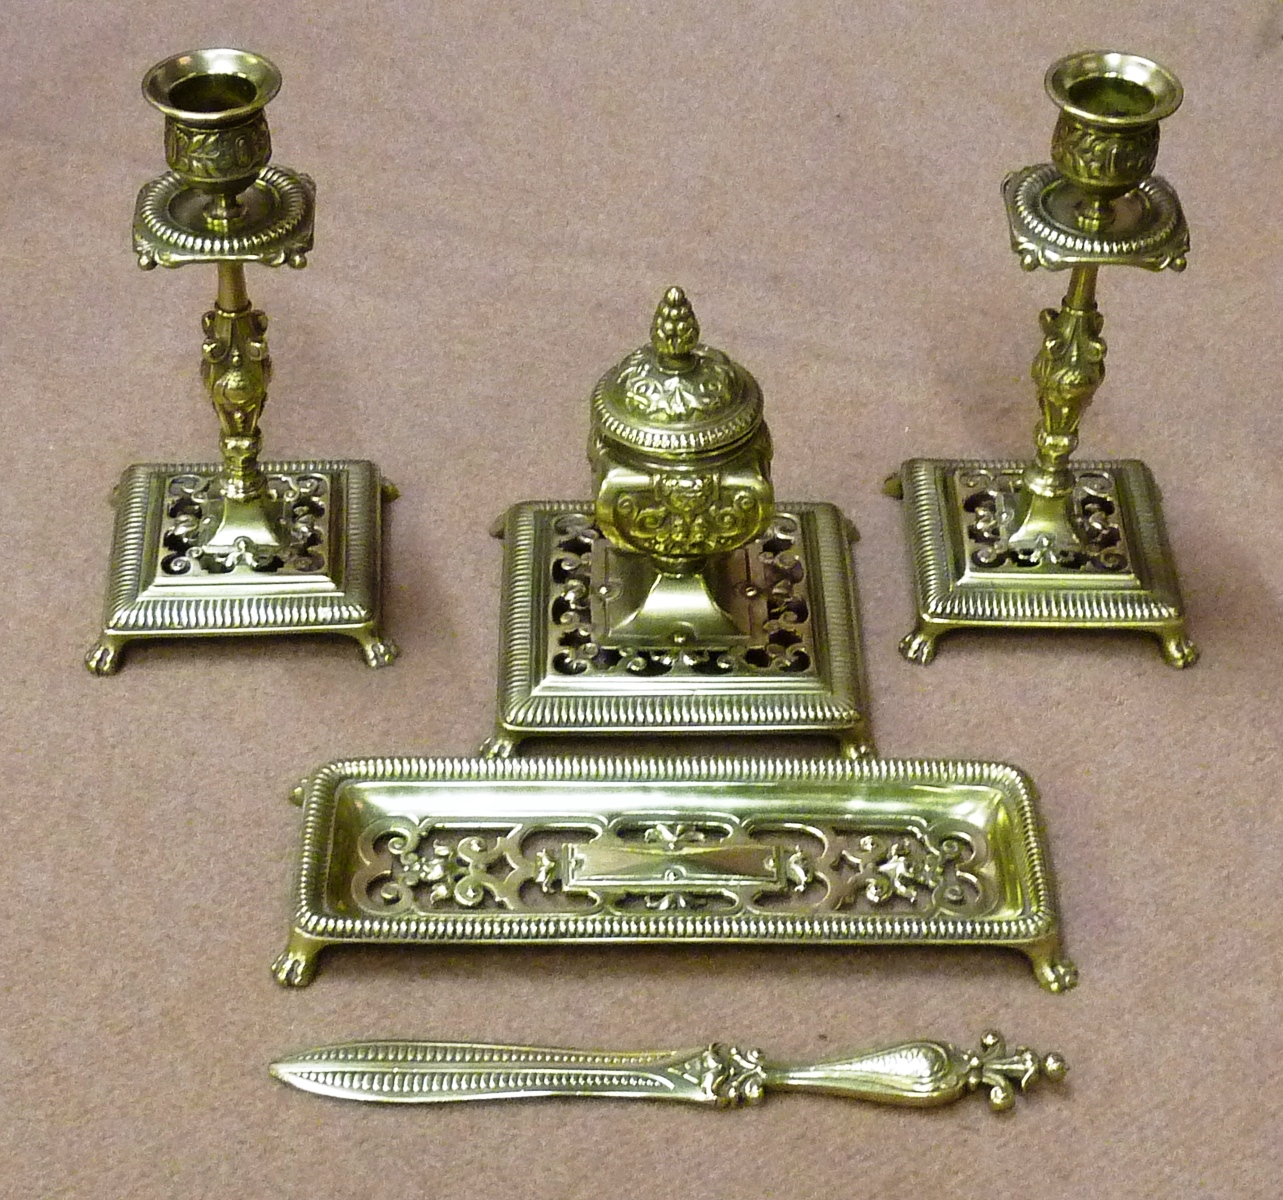 An unusual late 19th/early 20th Century Desk Set comprising a pair of table Candlesticks, a Pen